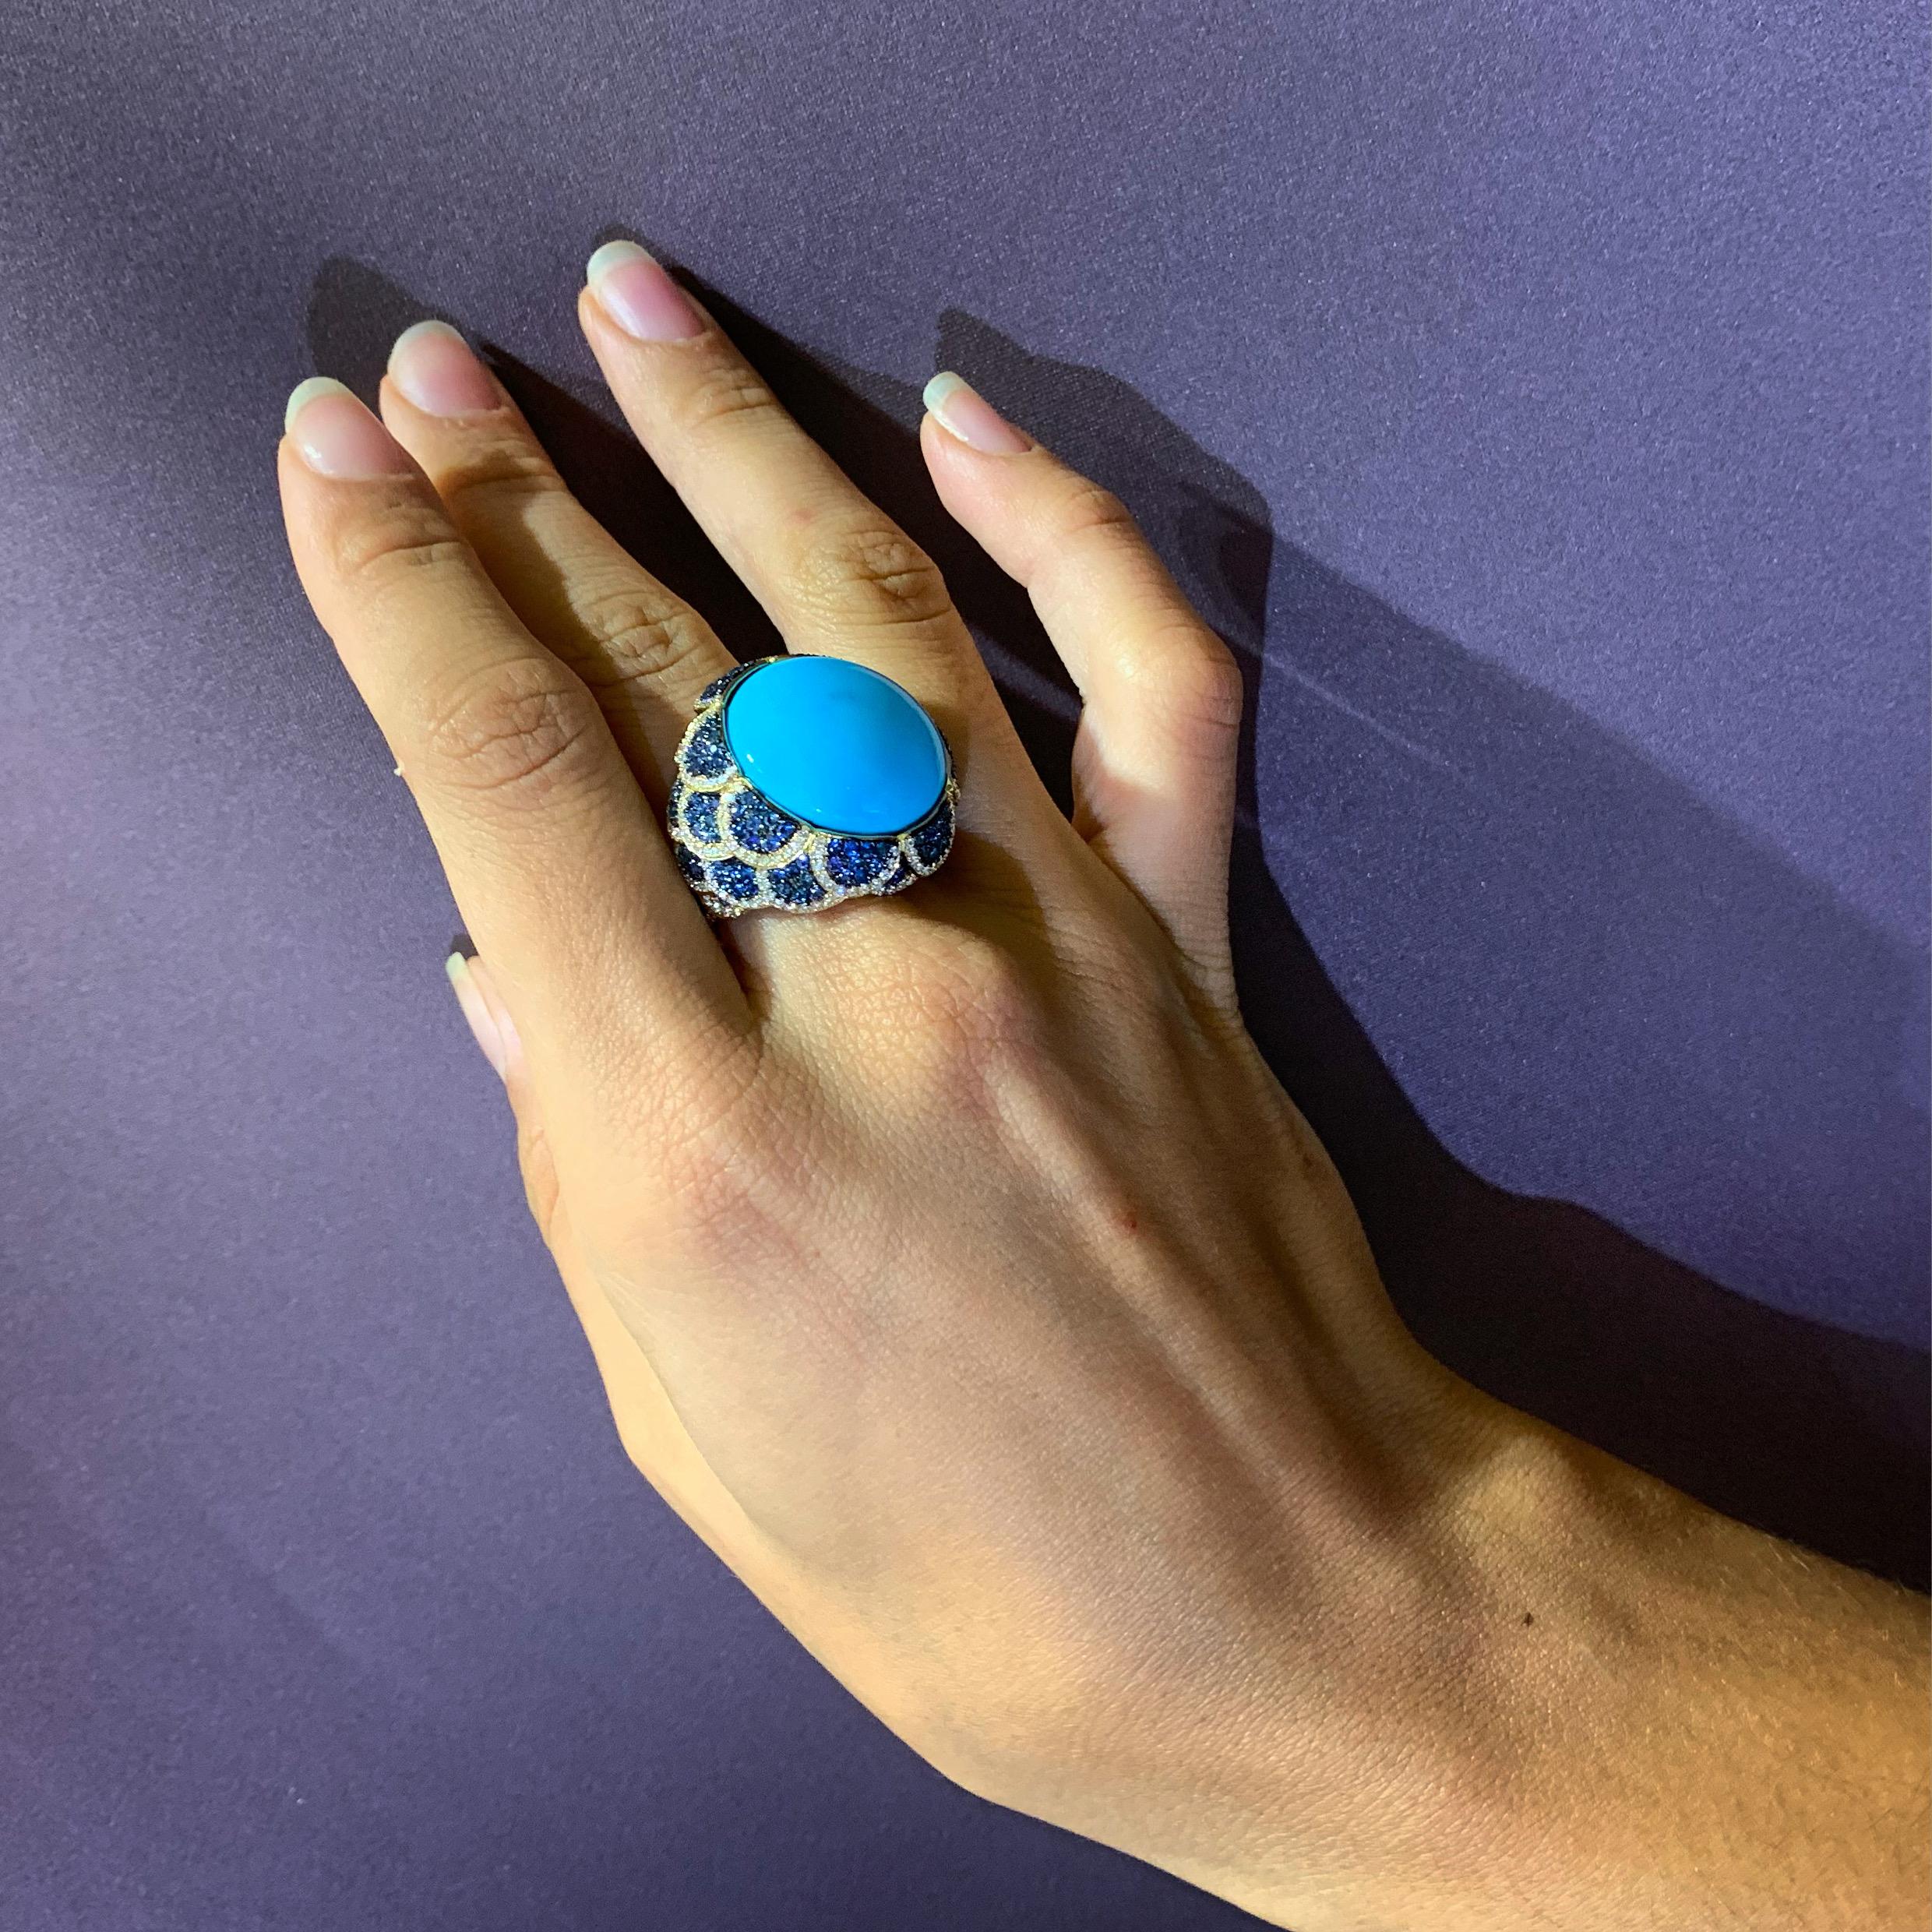 Rosior by Manuel Rosas Contemporary Cocktail Ring made in 19.2 Karat Yellow Gold featuring a Round Cut Turquoise with 17,81 ct and:
- 250 Diamonds (F Color, VVS clarity) with 1,04 ct,
- 172 Blue Sapphires with 2,22 ct.
Black Rhodium Finnishing.